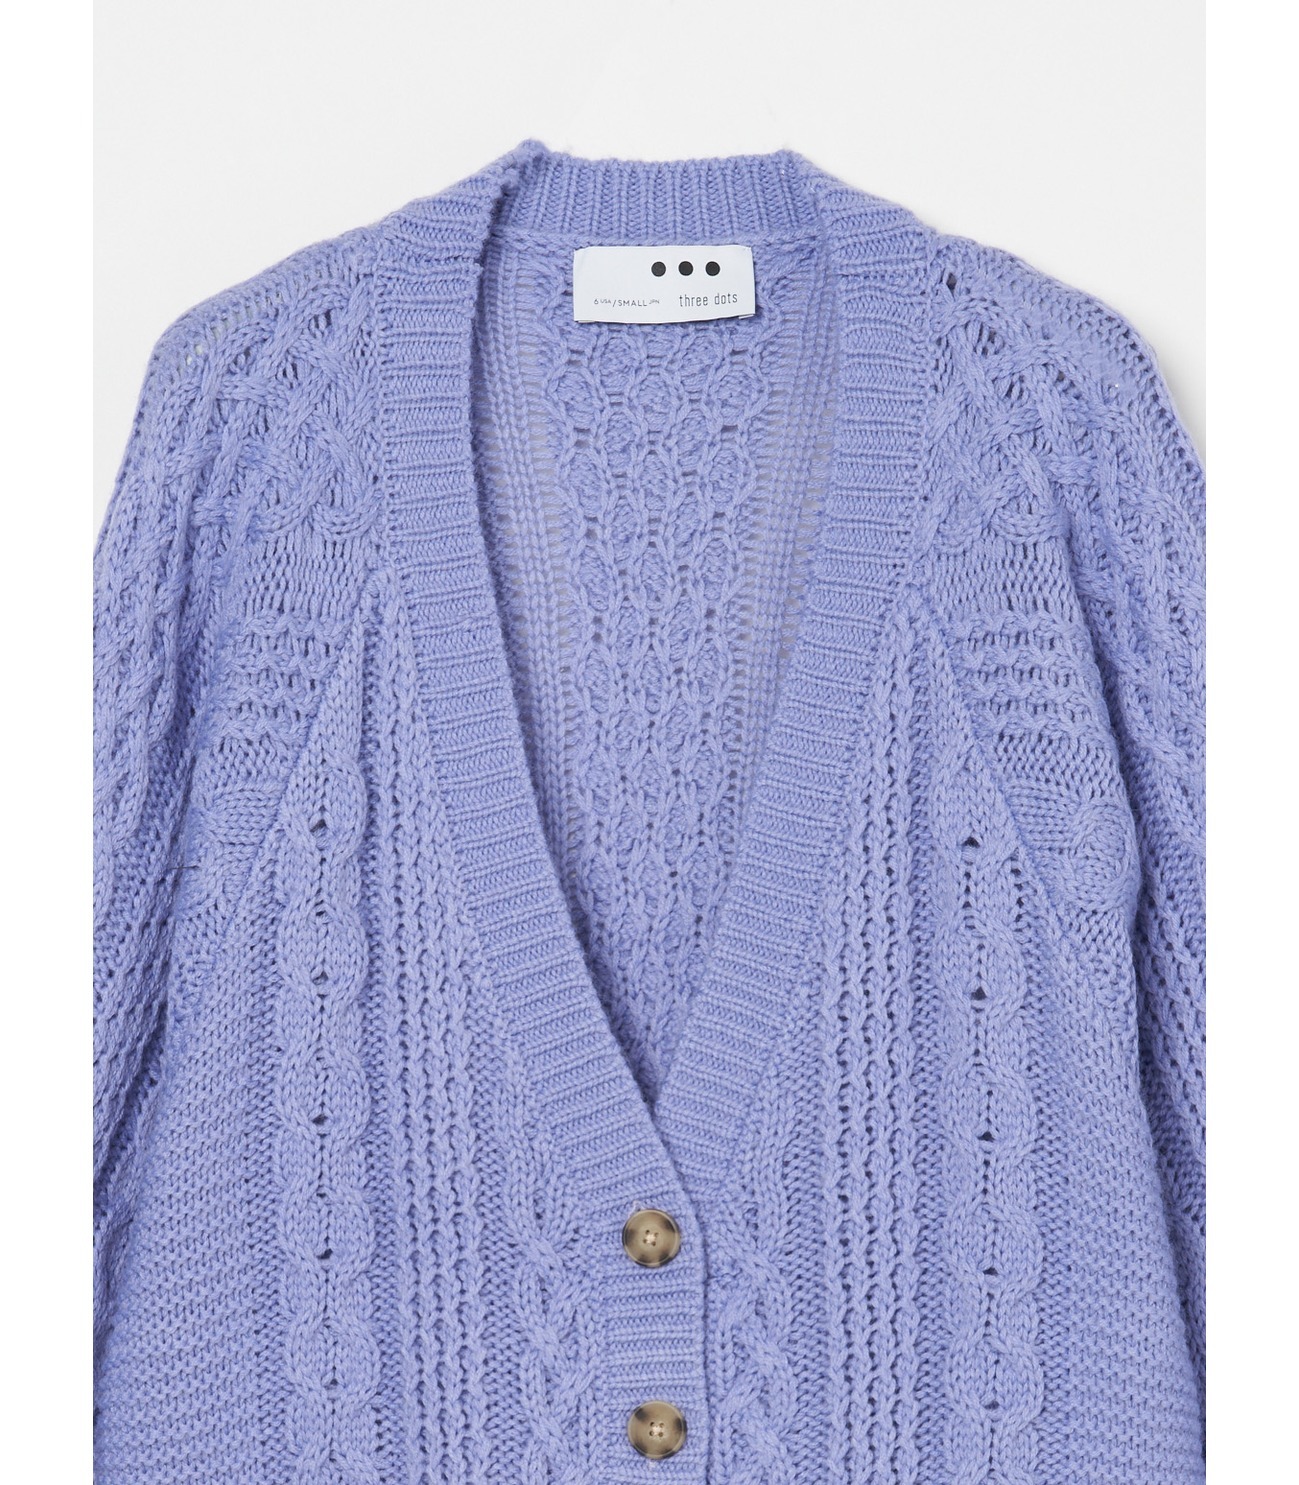 Bulky sweater l/s cable cardy 詳細画像 purple 2